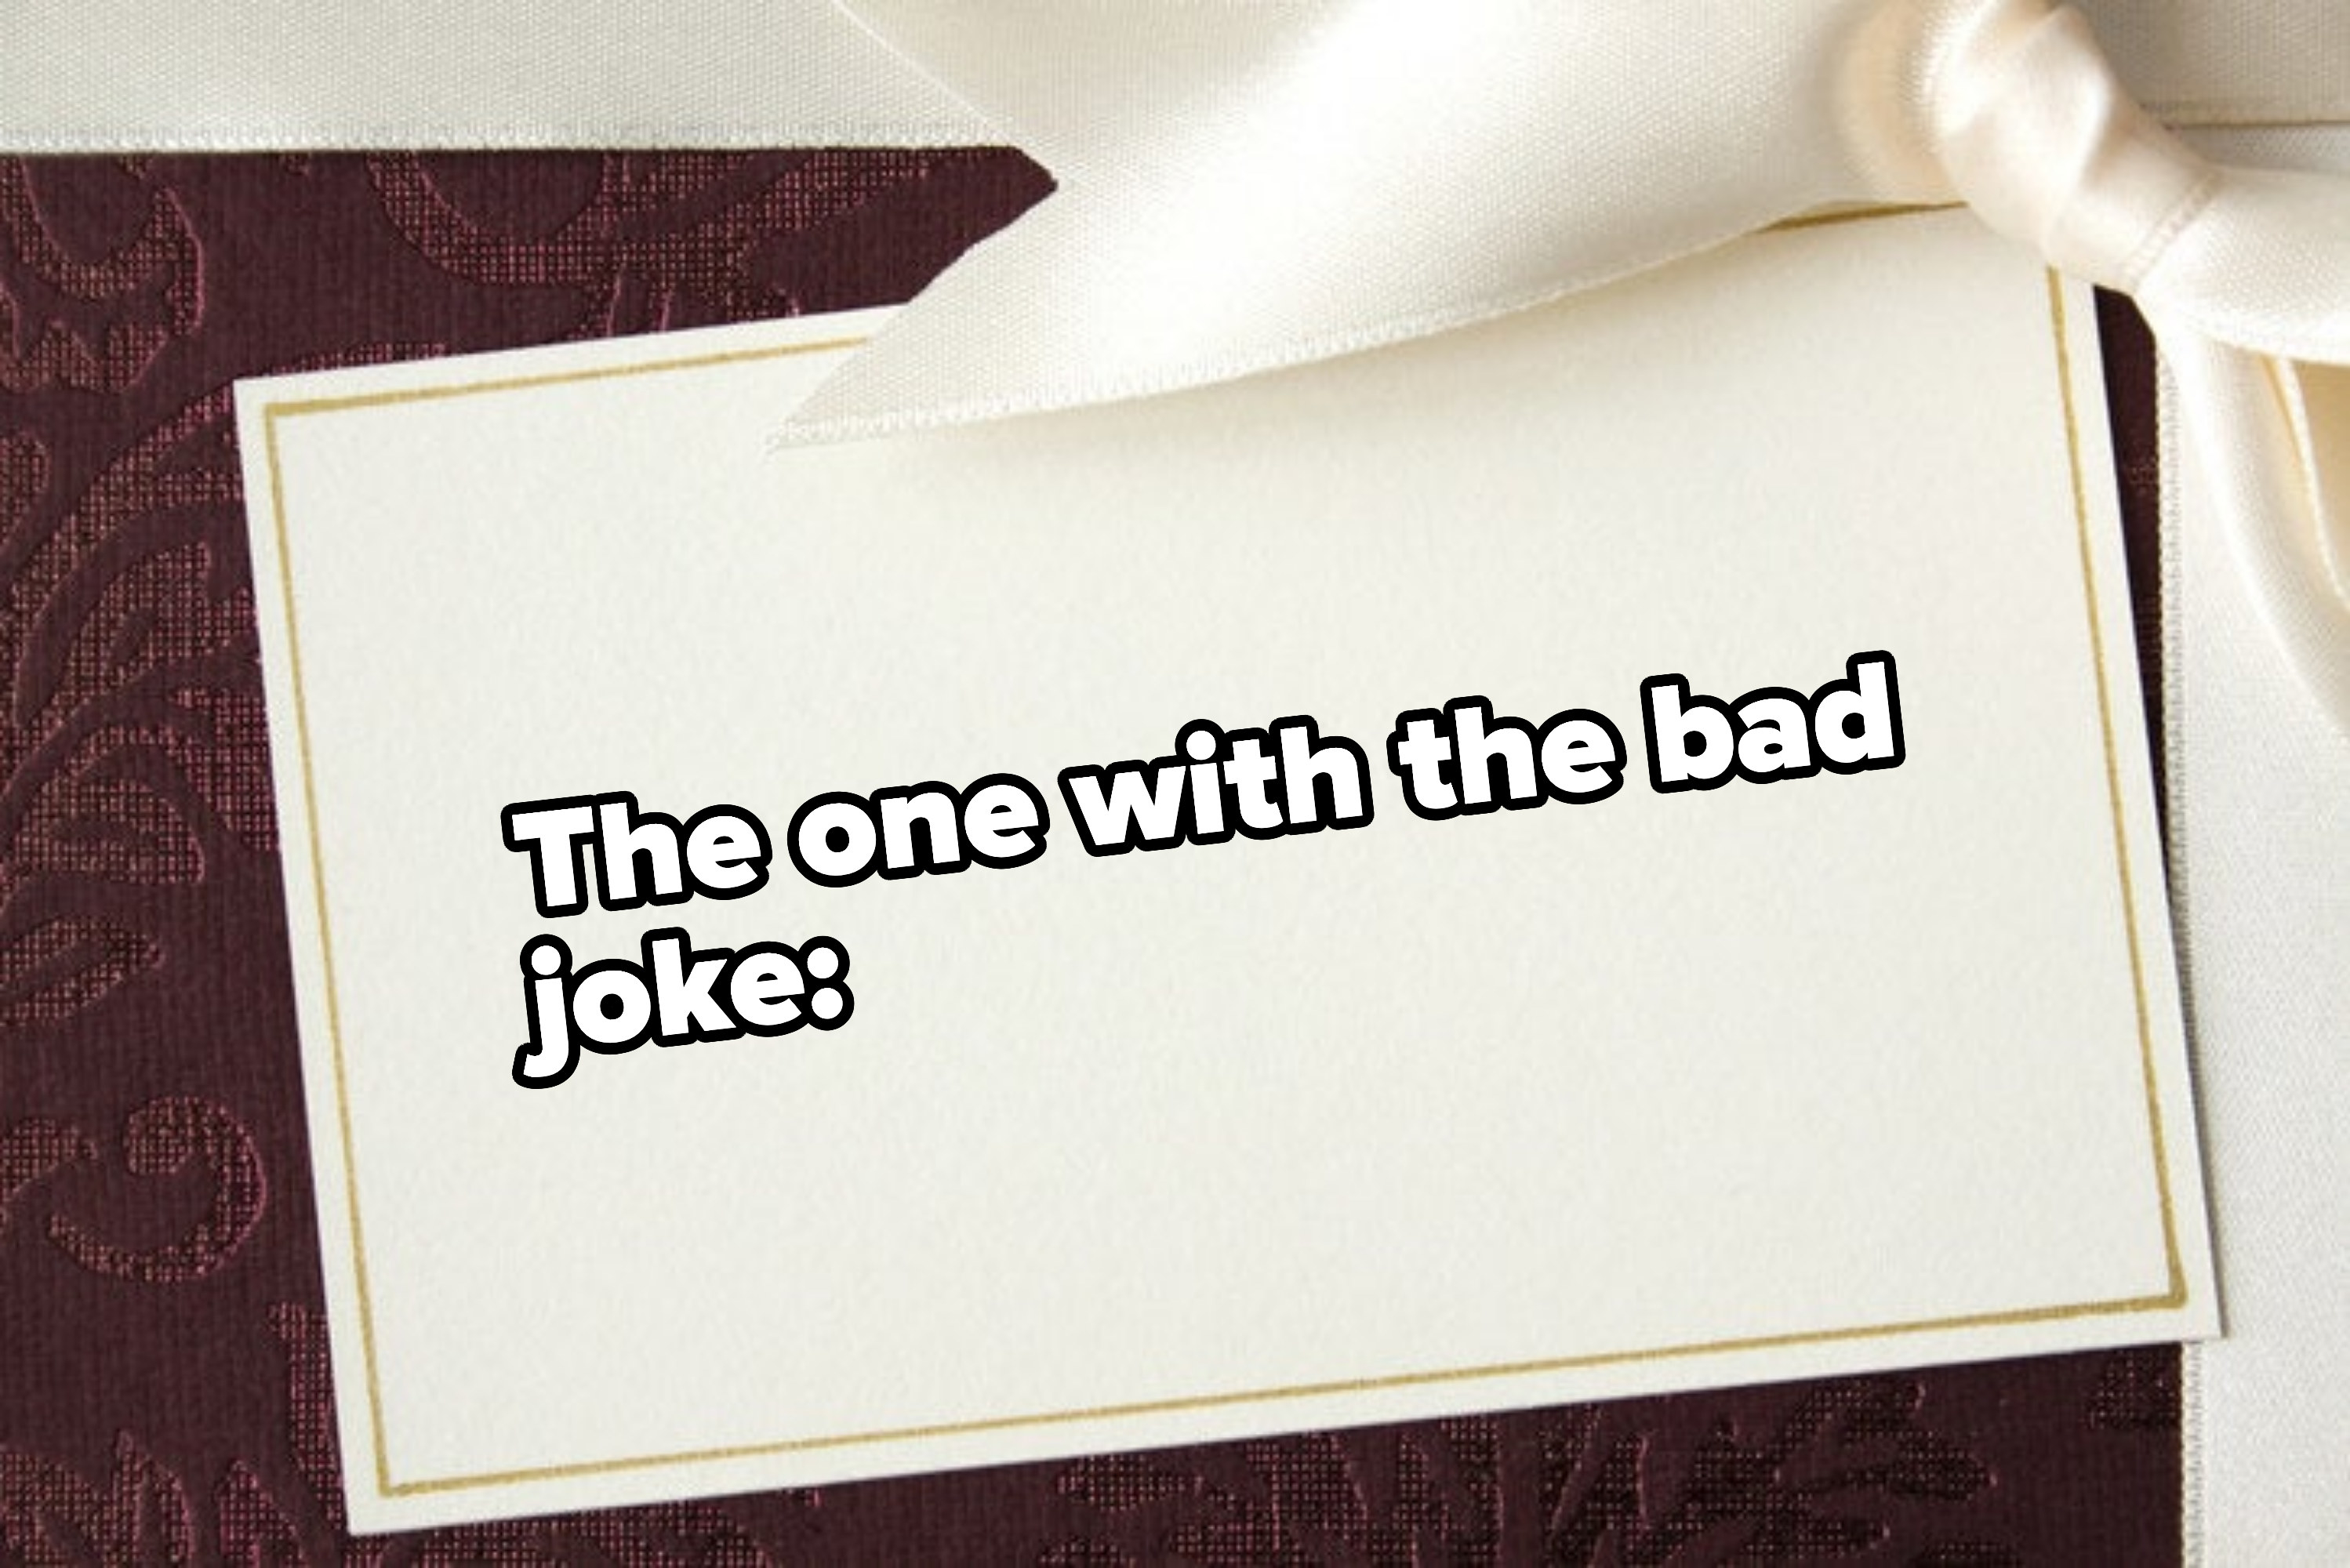 &quot;The one with the bad joke&quot;